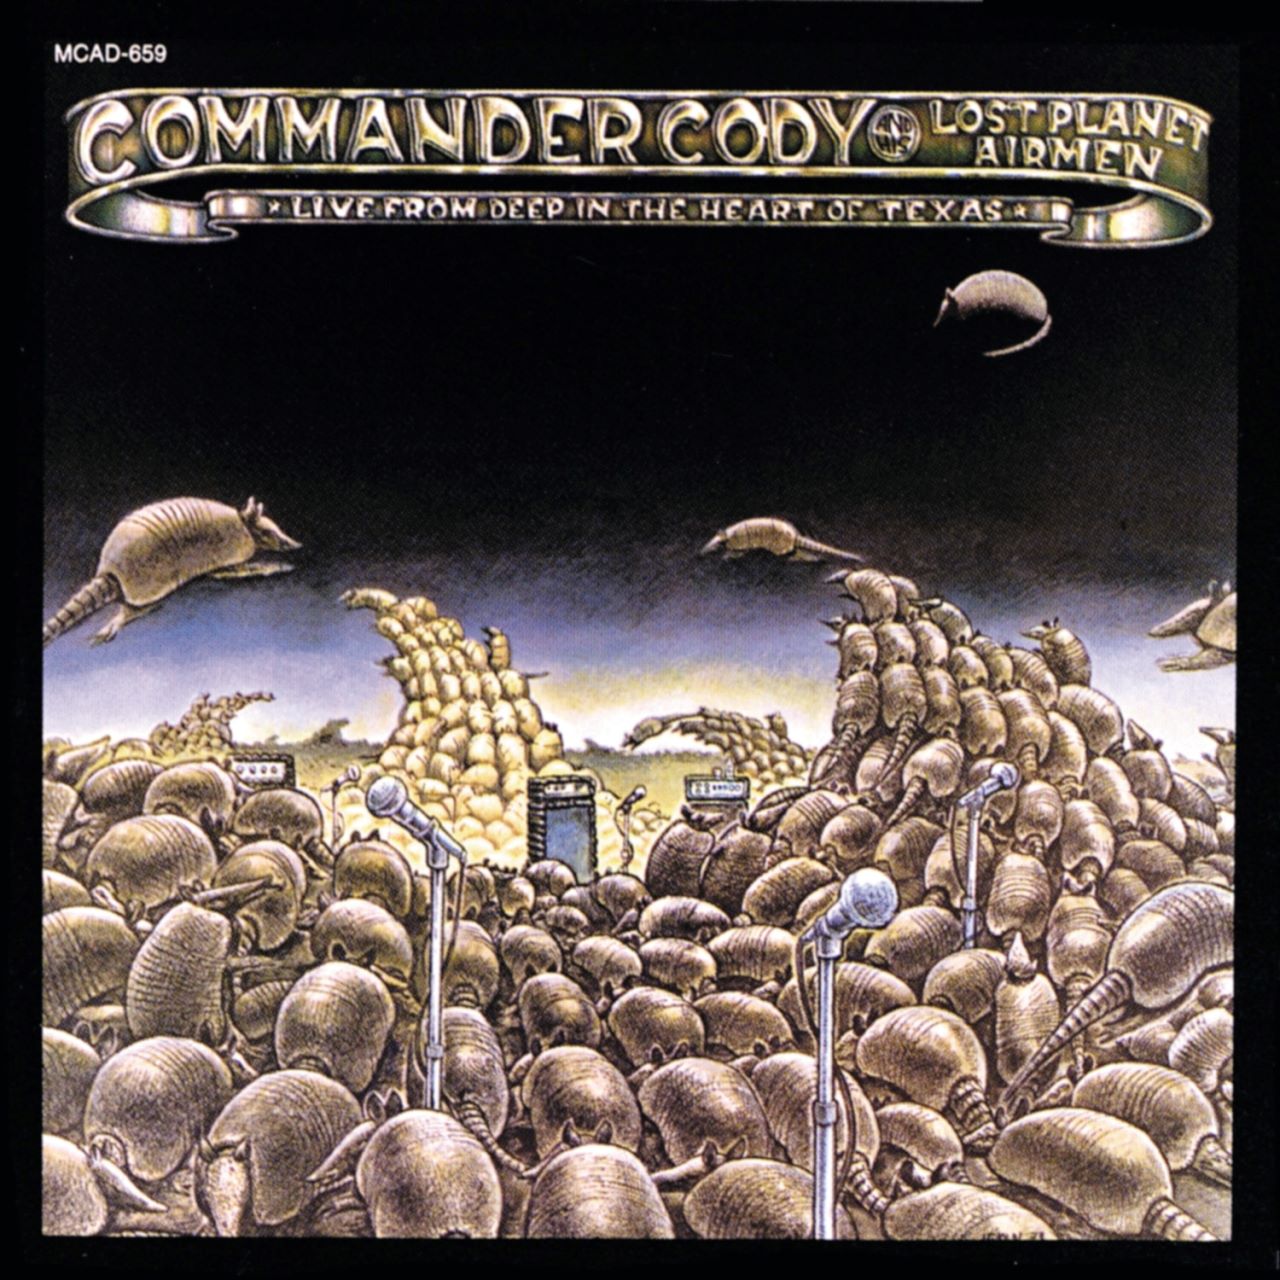 Commander Cody And His Lost Planet Airmen - Live From Deep In The Heart Of Texas cover album